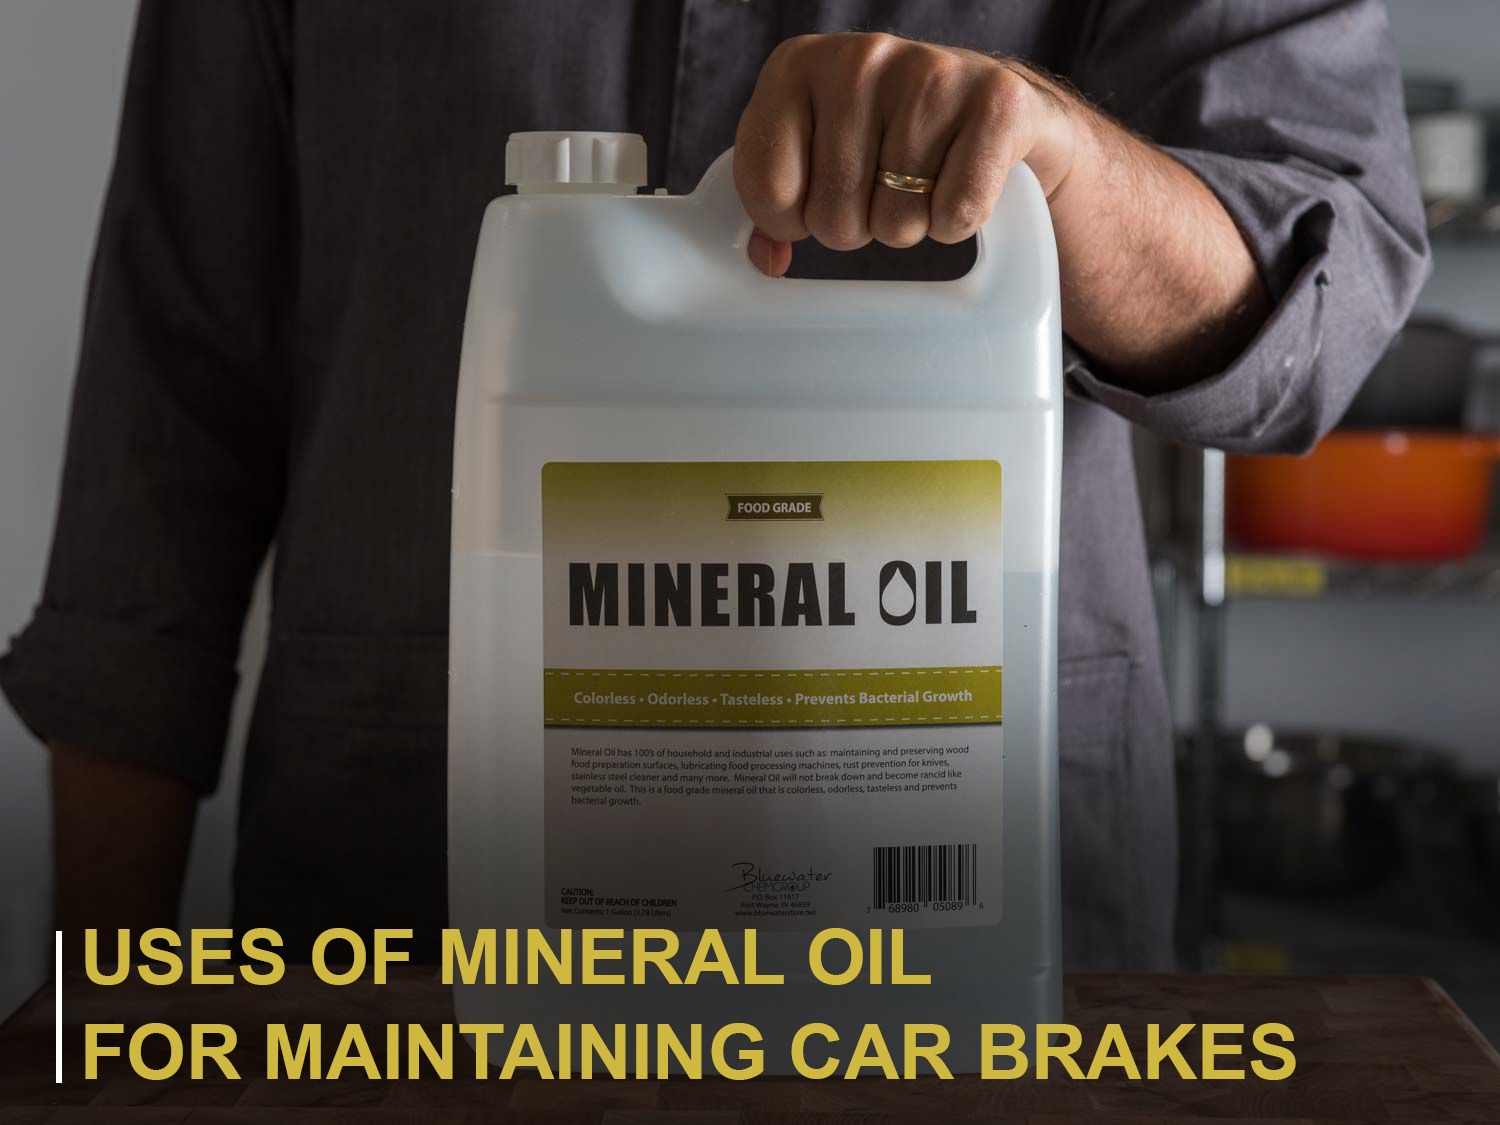 USES OF MINERAL OIL FOR MAINTAINING CAR BRAKES